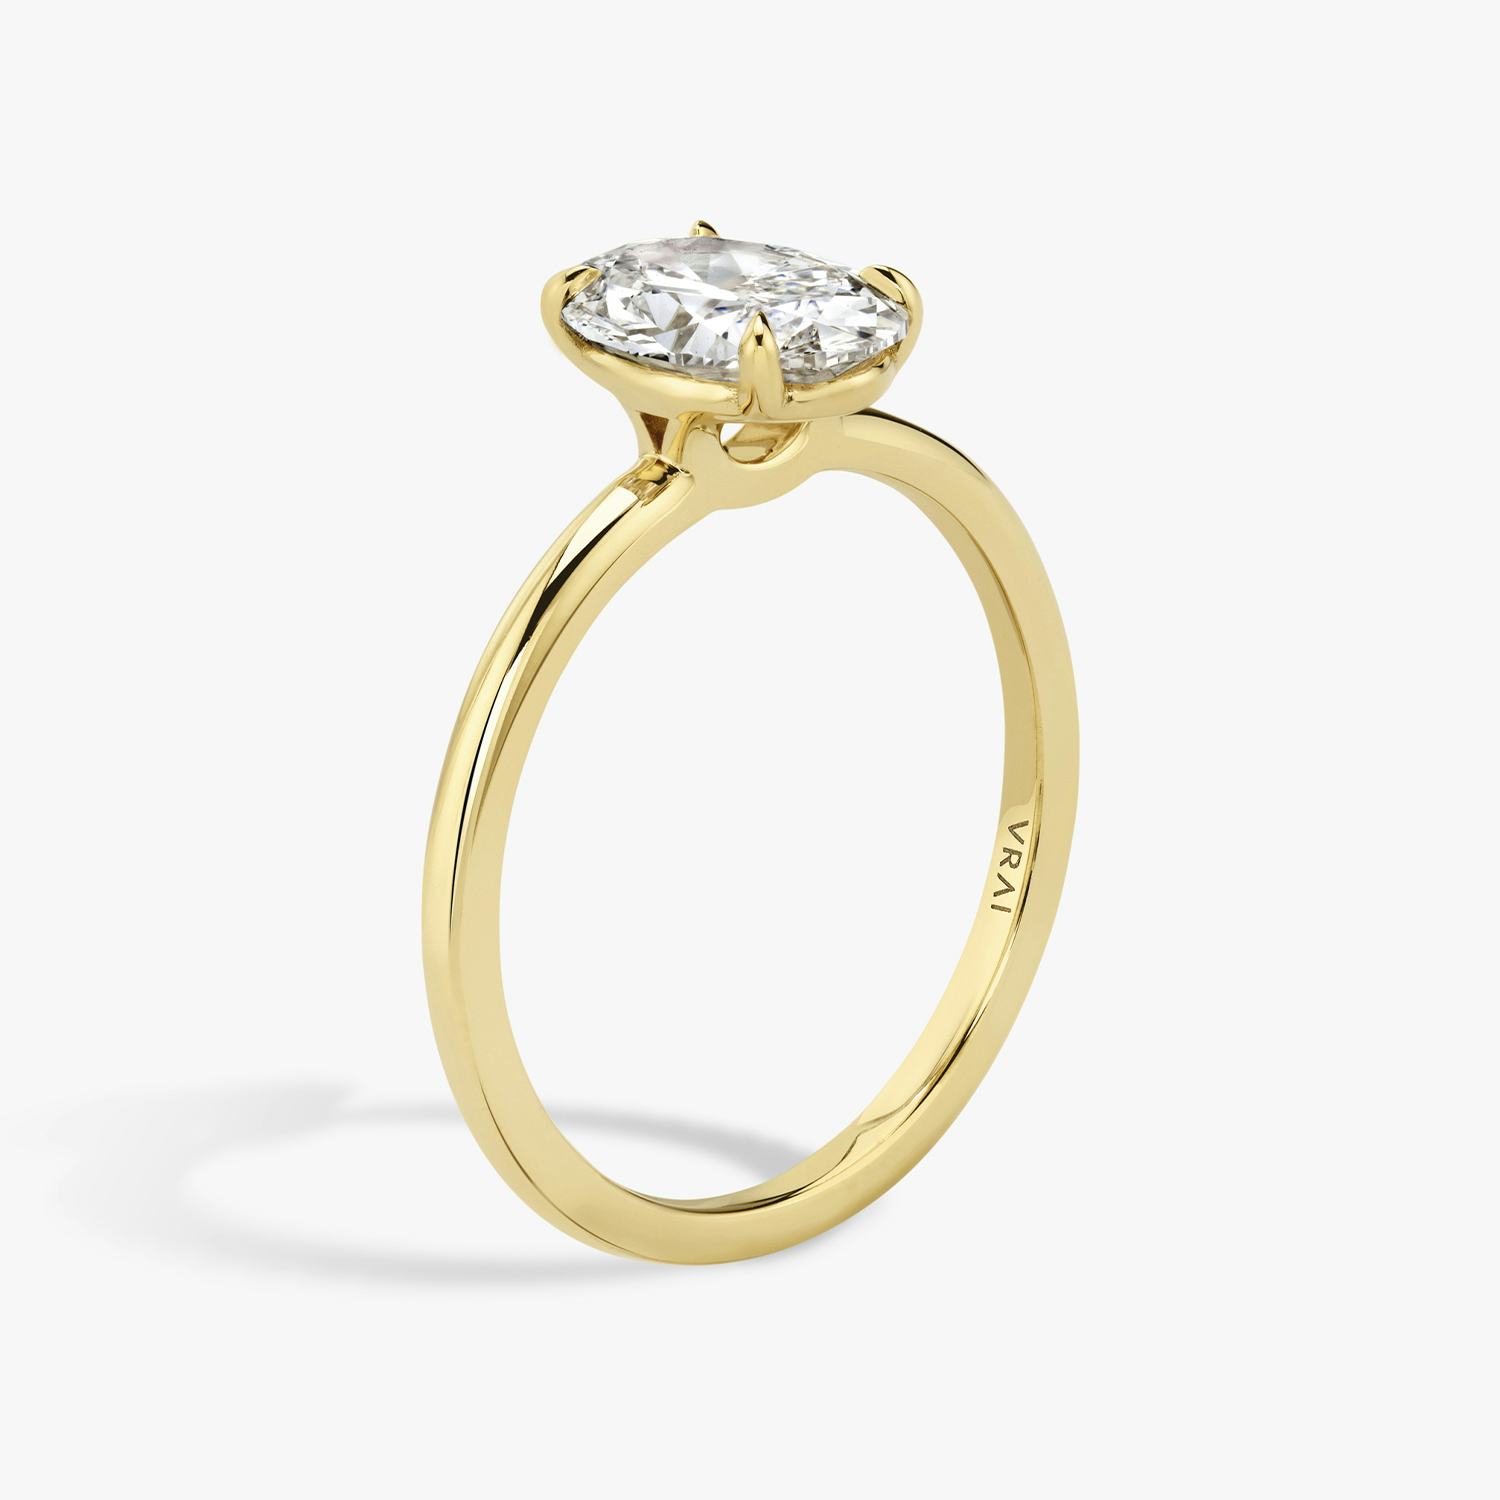 The Signature Oval Engagement Ring in Yellow gold | VRAI